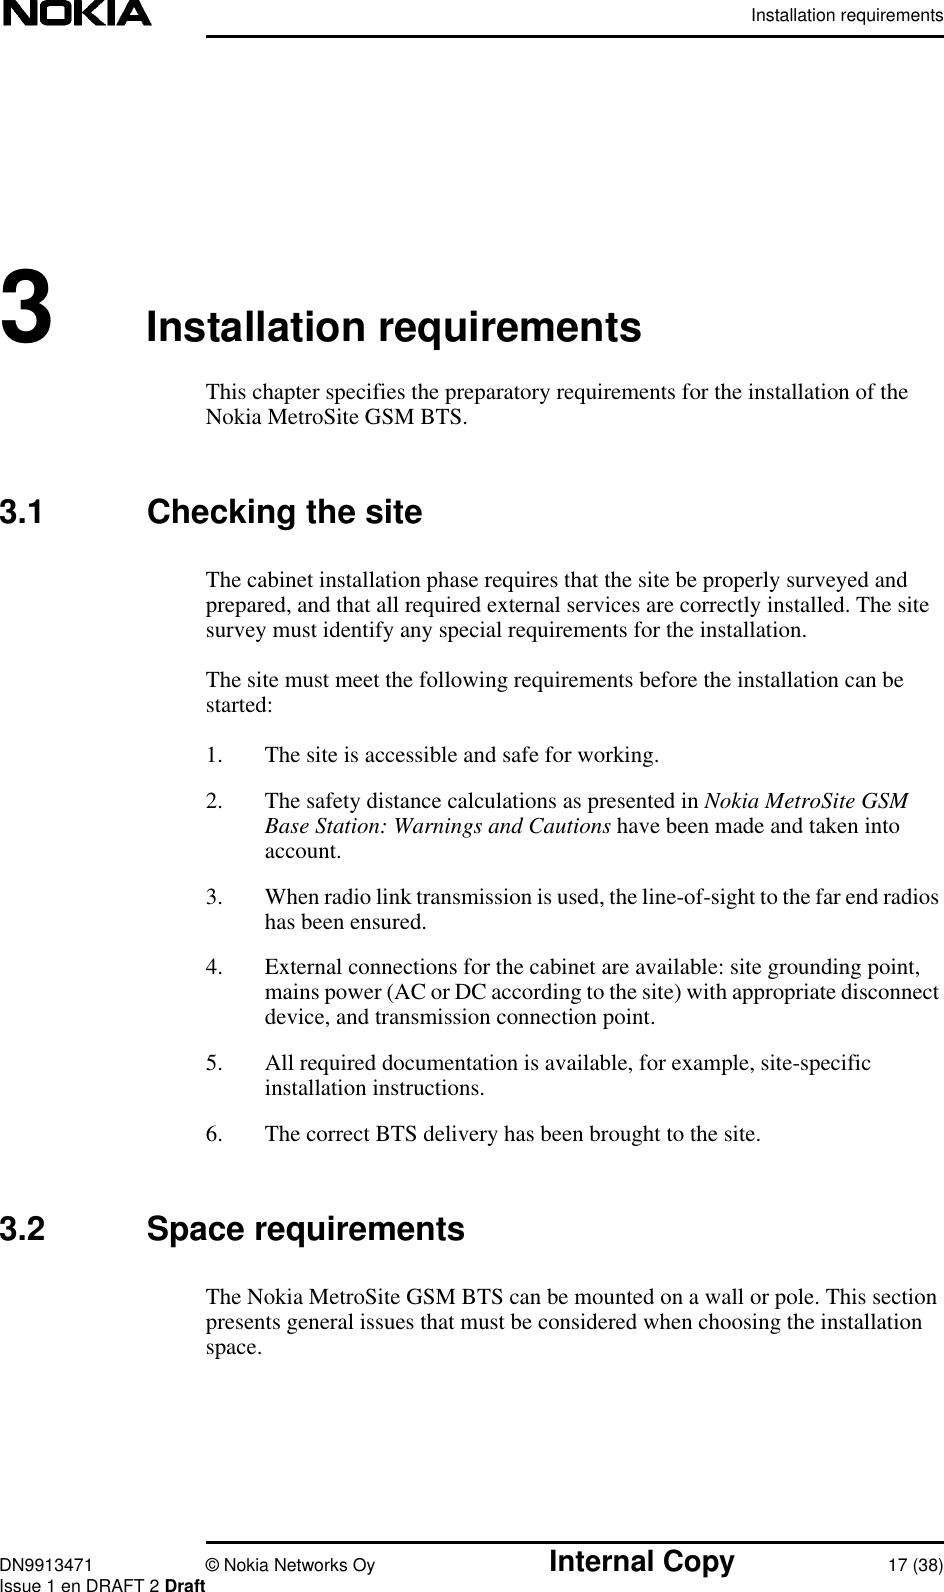 Installation requirementsDN9913471 © Nokia Networks Oy Internal Copy 17 (38)Issue 1 en DRAFT 2 Draft3Installation requirementsThis chapter specifies the preparatory requirements for the installation of theNokia MetroSite GSM BTS.3.1 Checking the siteThe cabinet installation phase requires that the site be properly surveyed andprepared, and that all required external services are correctly installed. The sitesurvey must identify any special requirements for the installation.The site must meet the following requirements before the installation can bestarted:1. The site is accessible and safe for working.2. The safety distance calculations as presented in Nokia MetroSite GSMBase Station: Warnings and Cautions have been made and taken intoaccount.3. When radio link transmission is used, the line-of-sight to the far end radioshas been ensured.4. External connections for the cabinet are available: site grounding point,mains power (AC or DC according to the site) with appropriate disconnectdevice, and transmission connection point.5. All required documentation is available, for example, site-specificinstallation instructions.6. The correct BTS delivery has been brought to the site.3.2 Space requirementsThe Nokia MetroSite GSM BTS can be mounted on a wall or pole. This sectionpresents general issues that must be considered when choosing the installationspace.